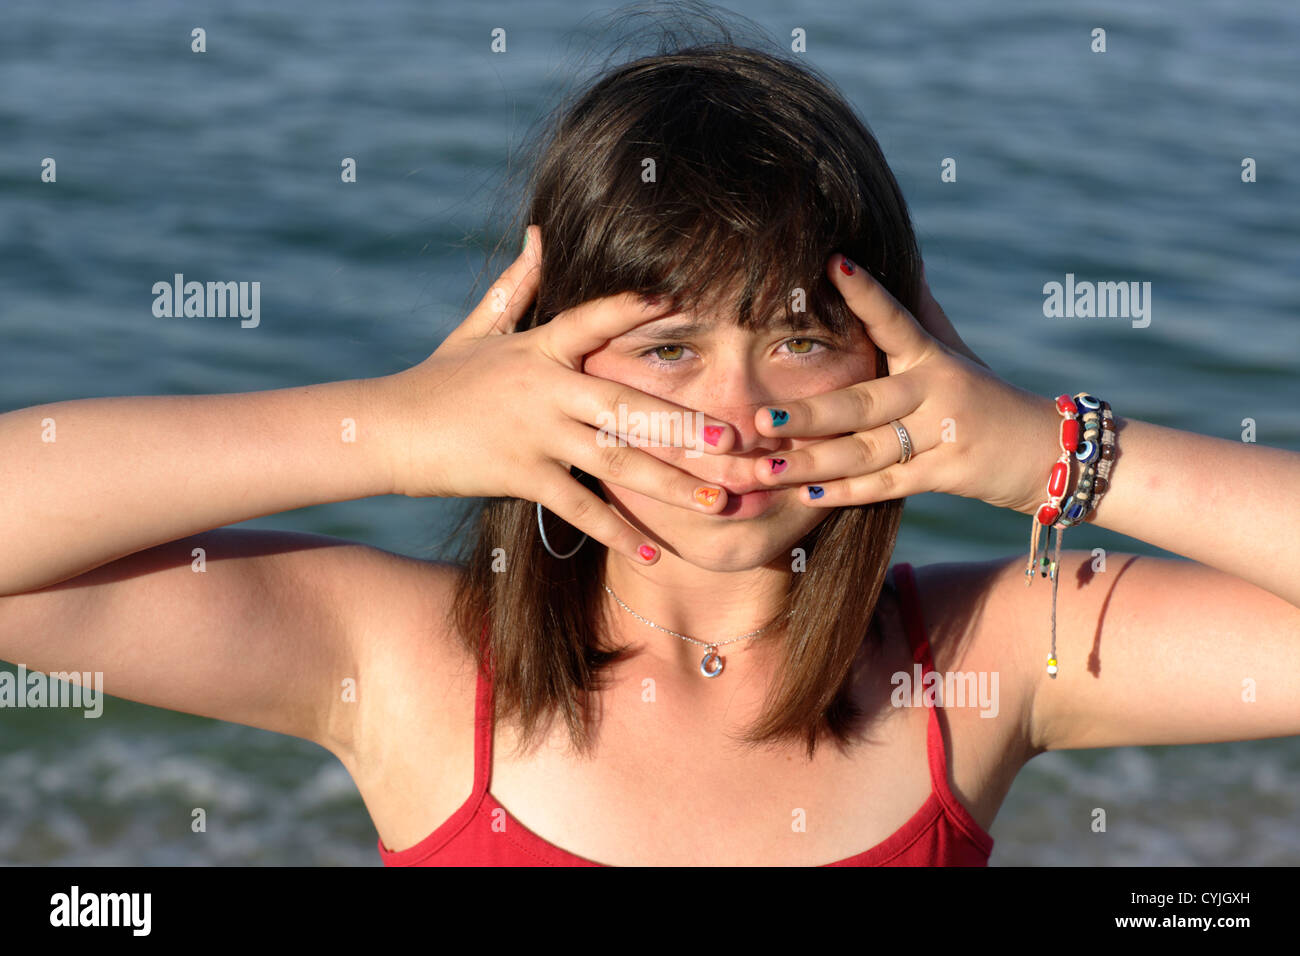 girl shows her painted nails in front of face Stock Photo